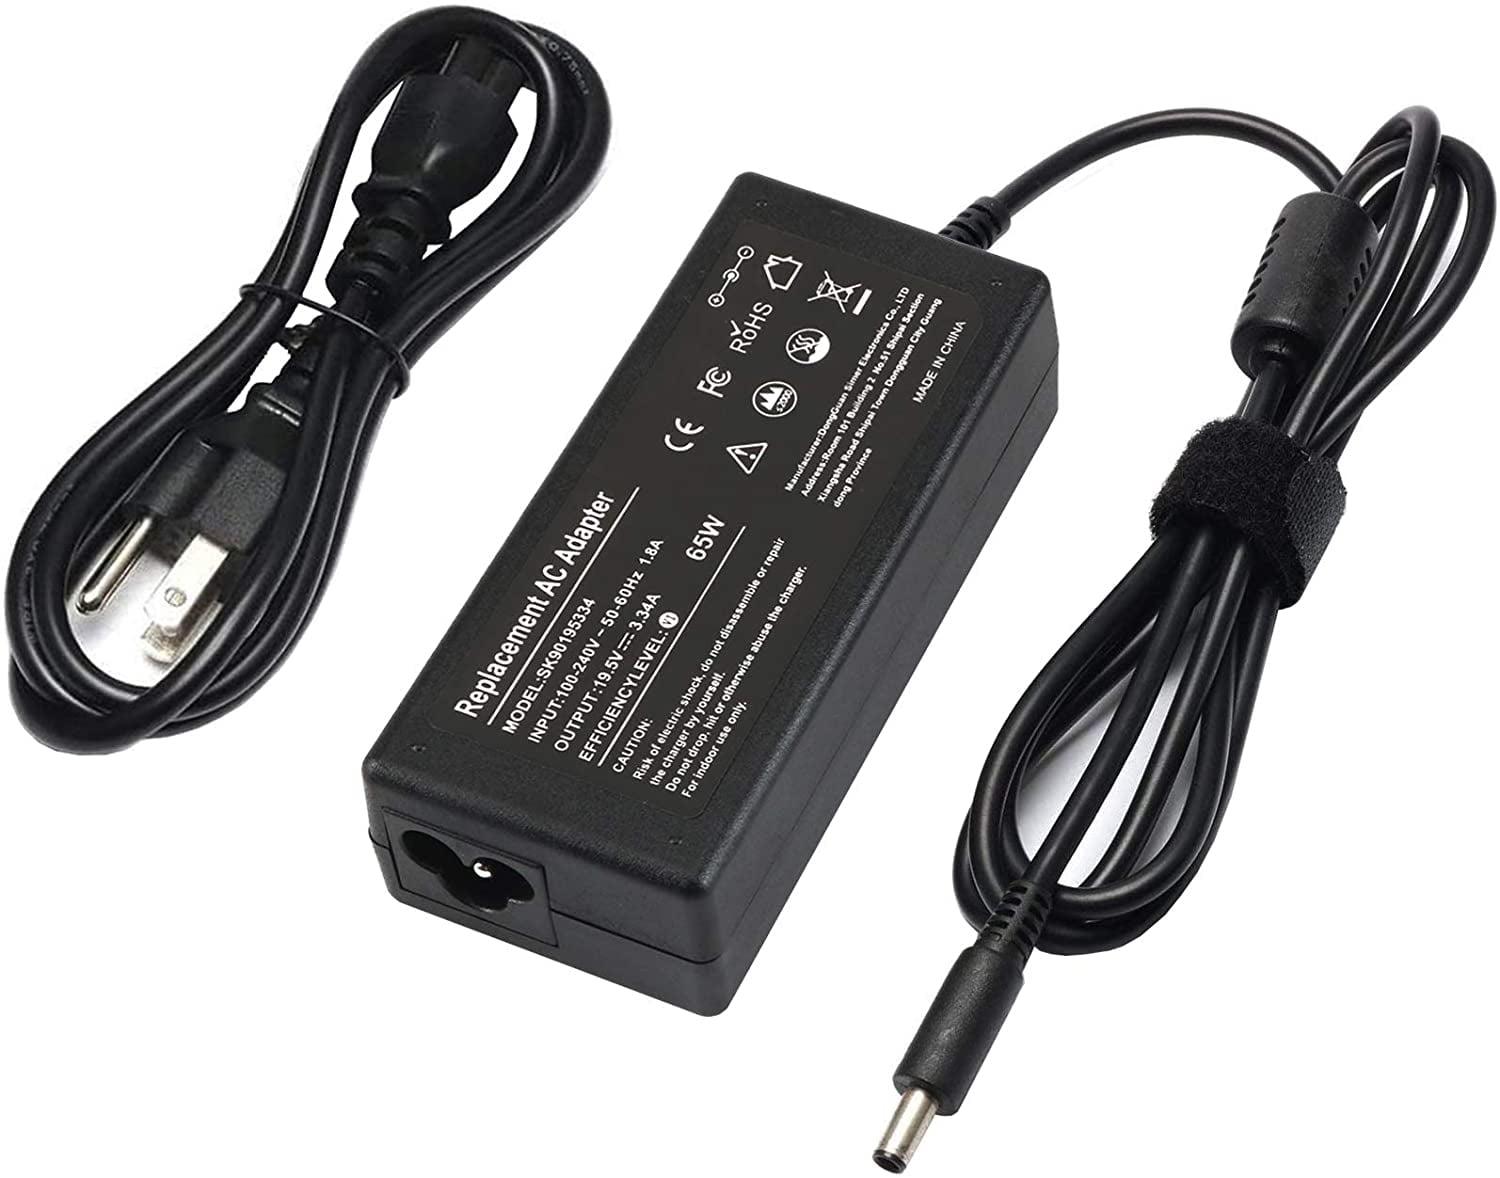 OEM Dell Inspiron 15 3000 5000 7000 Series 45w Laptop Power Supply Charger+Cord 